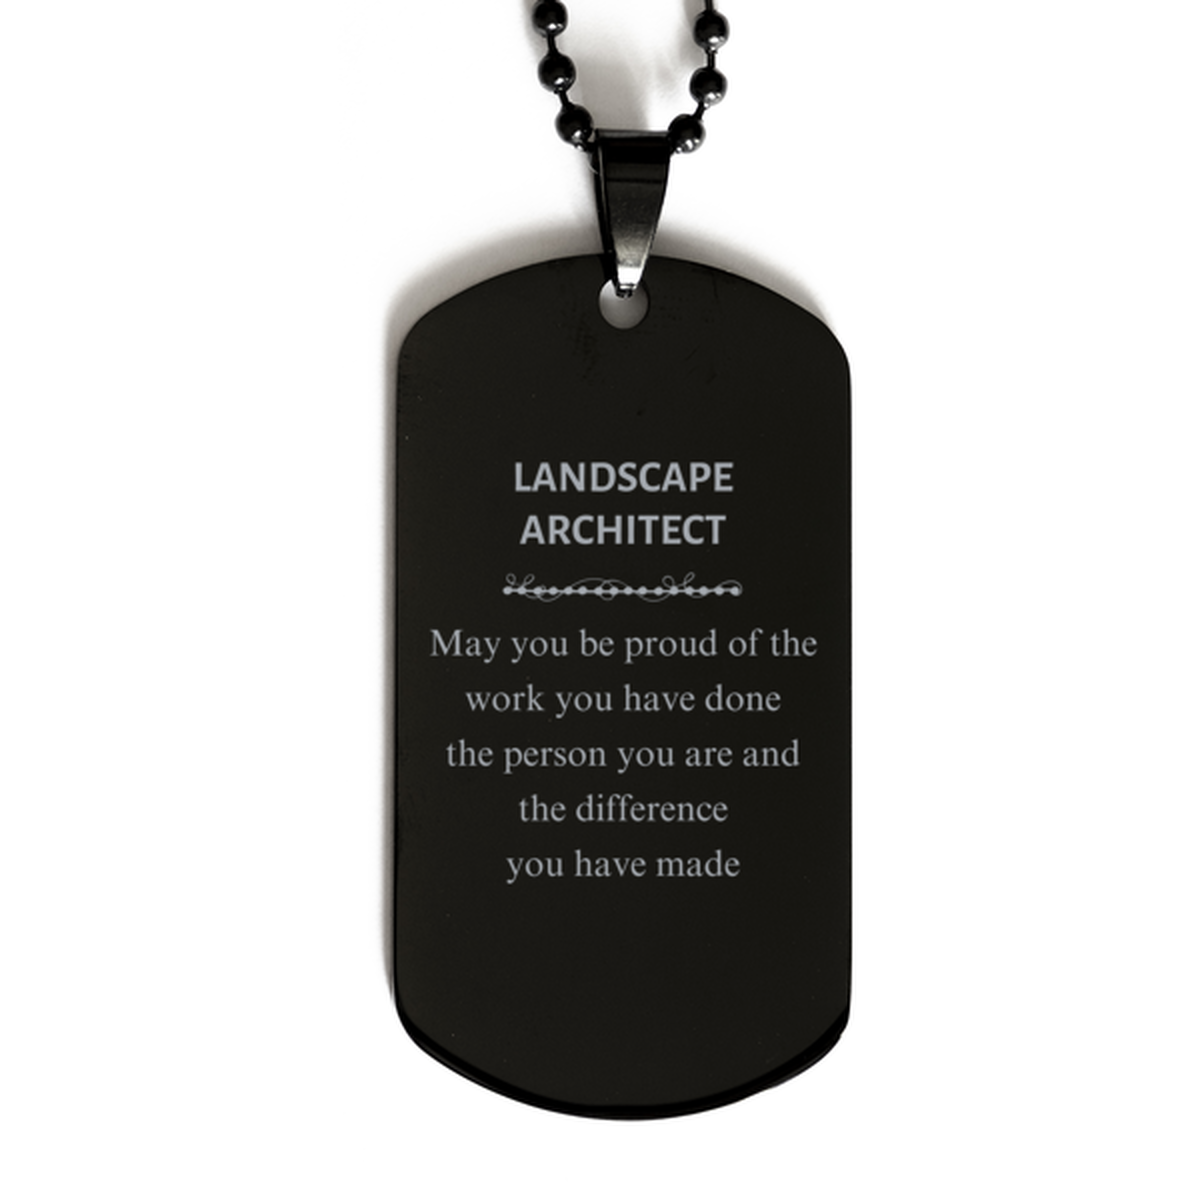 Landscape Architect May you be proud of the work you have done, Retirement Landscape Architect Black Dog Tag for Colleague Appreciation Gifts Amazing for Landscape Architect